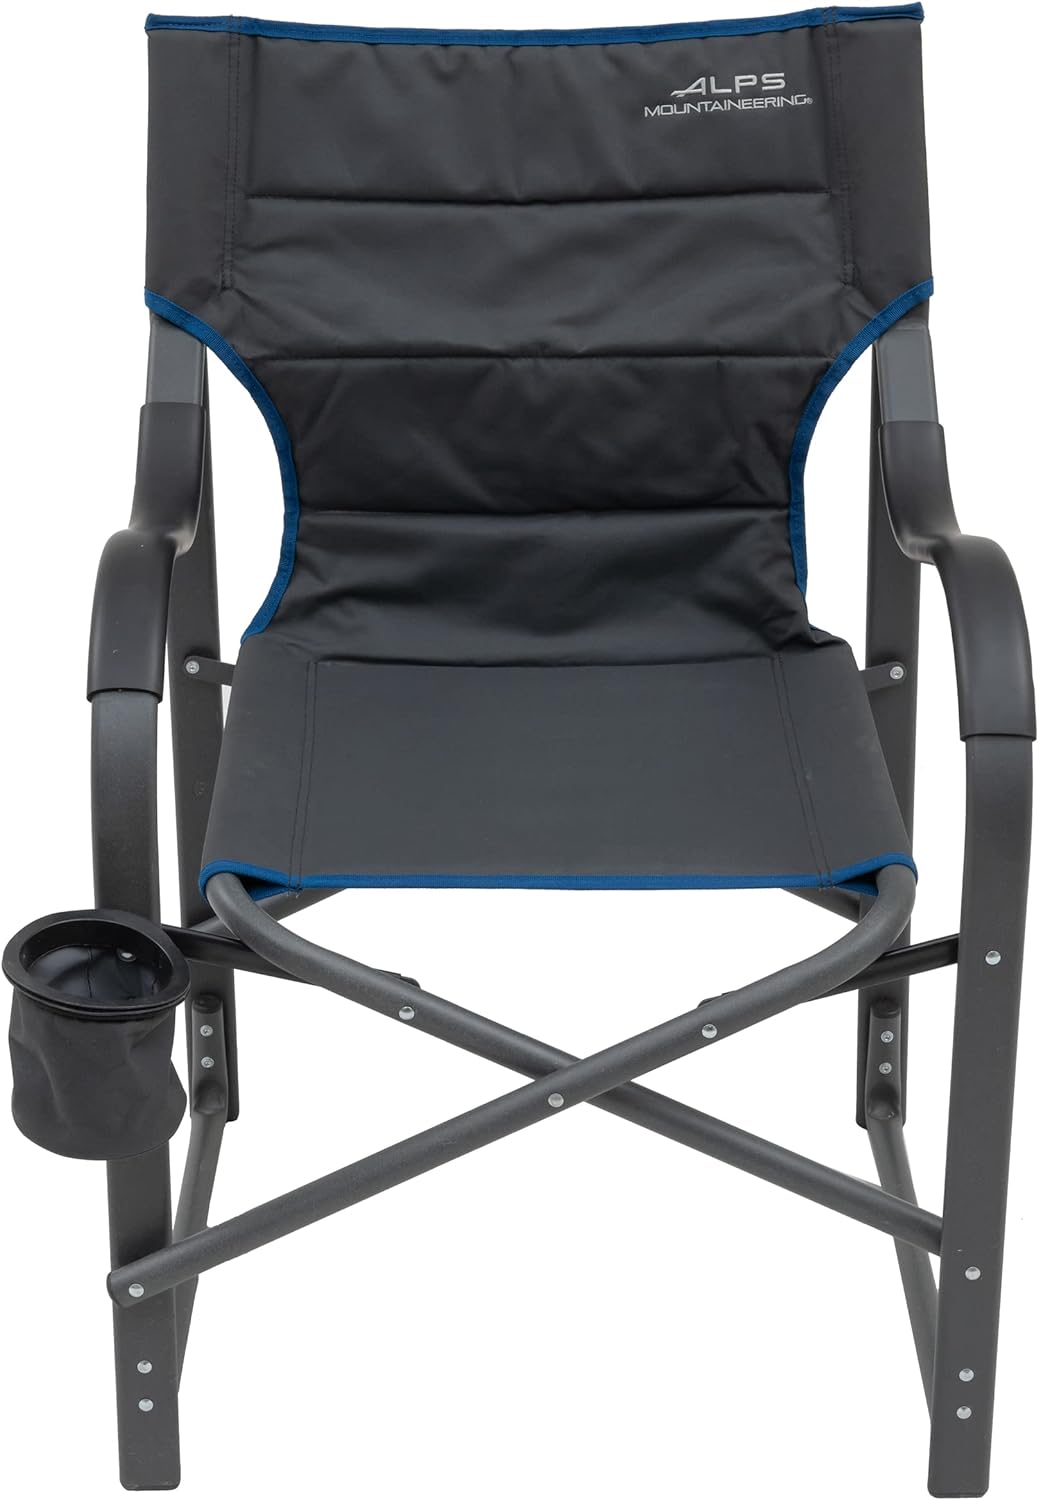 ALPS Mountaineering Camp Chairs for Adults - Comfortable Padded Polyester Fabric Over Sturdy Wide Aluminum\/Steel Frame with Tall Back, Folds Flat